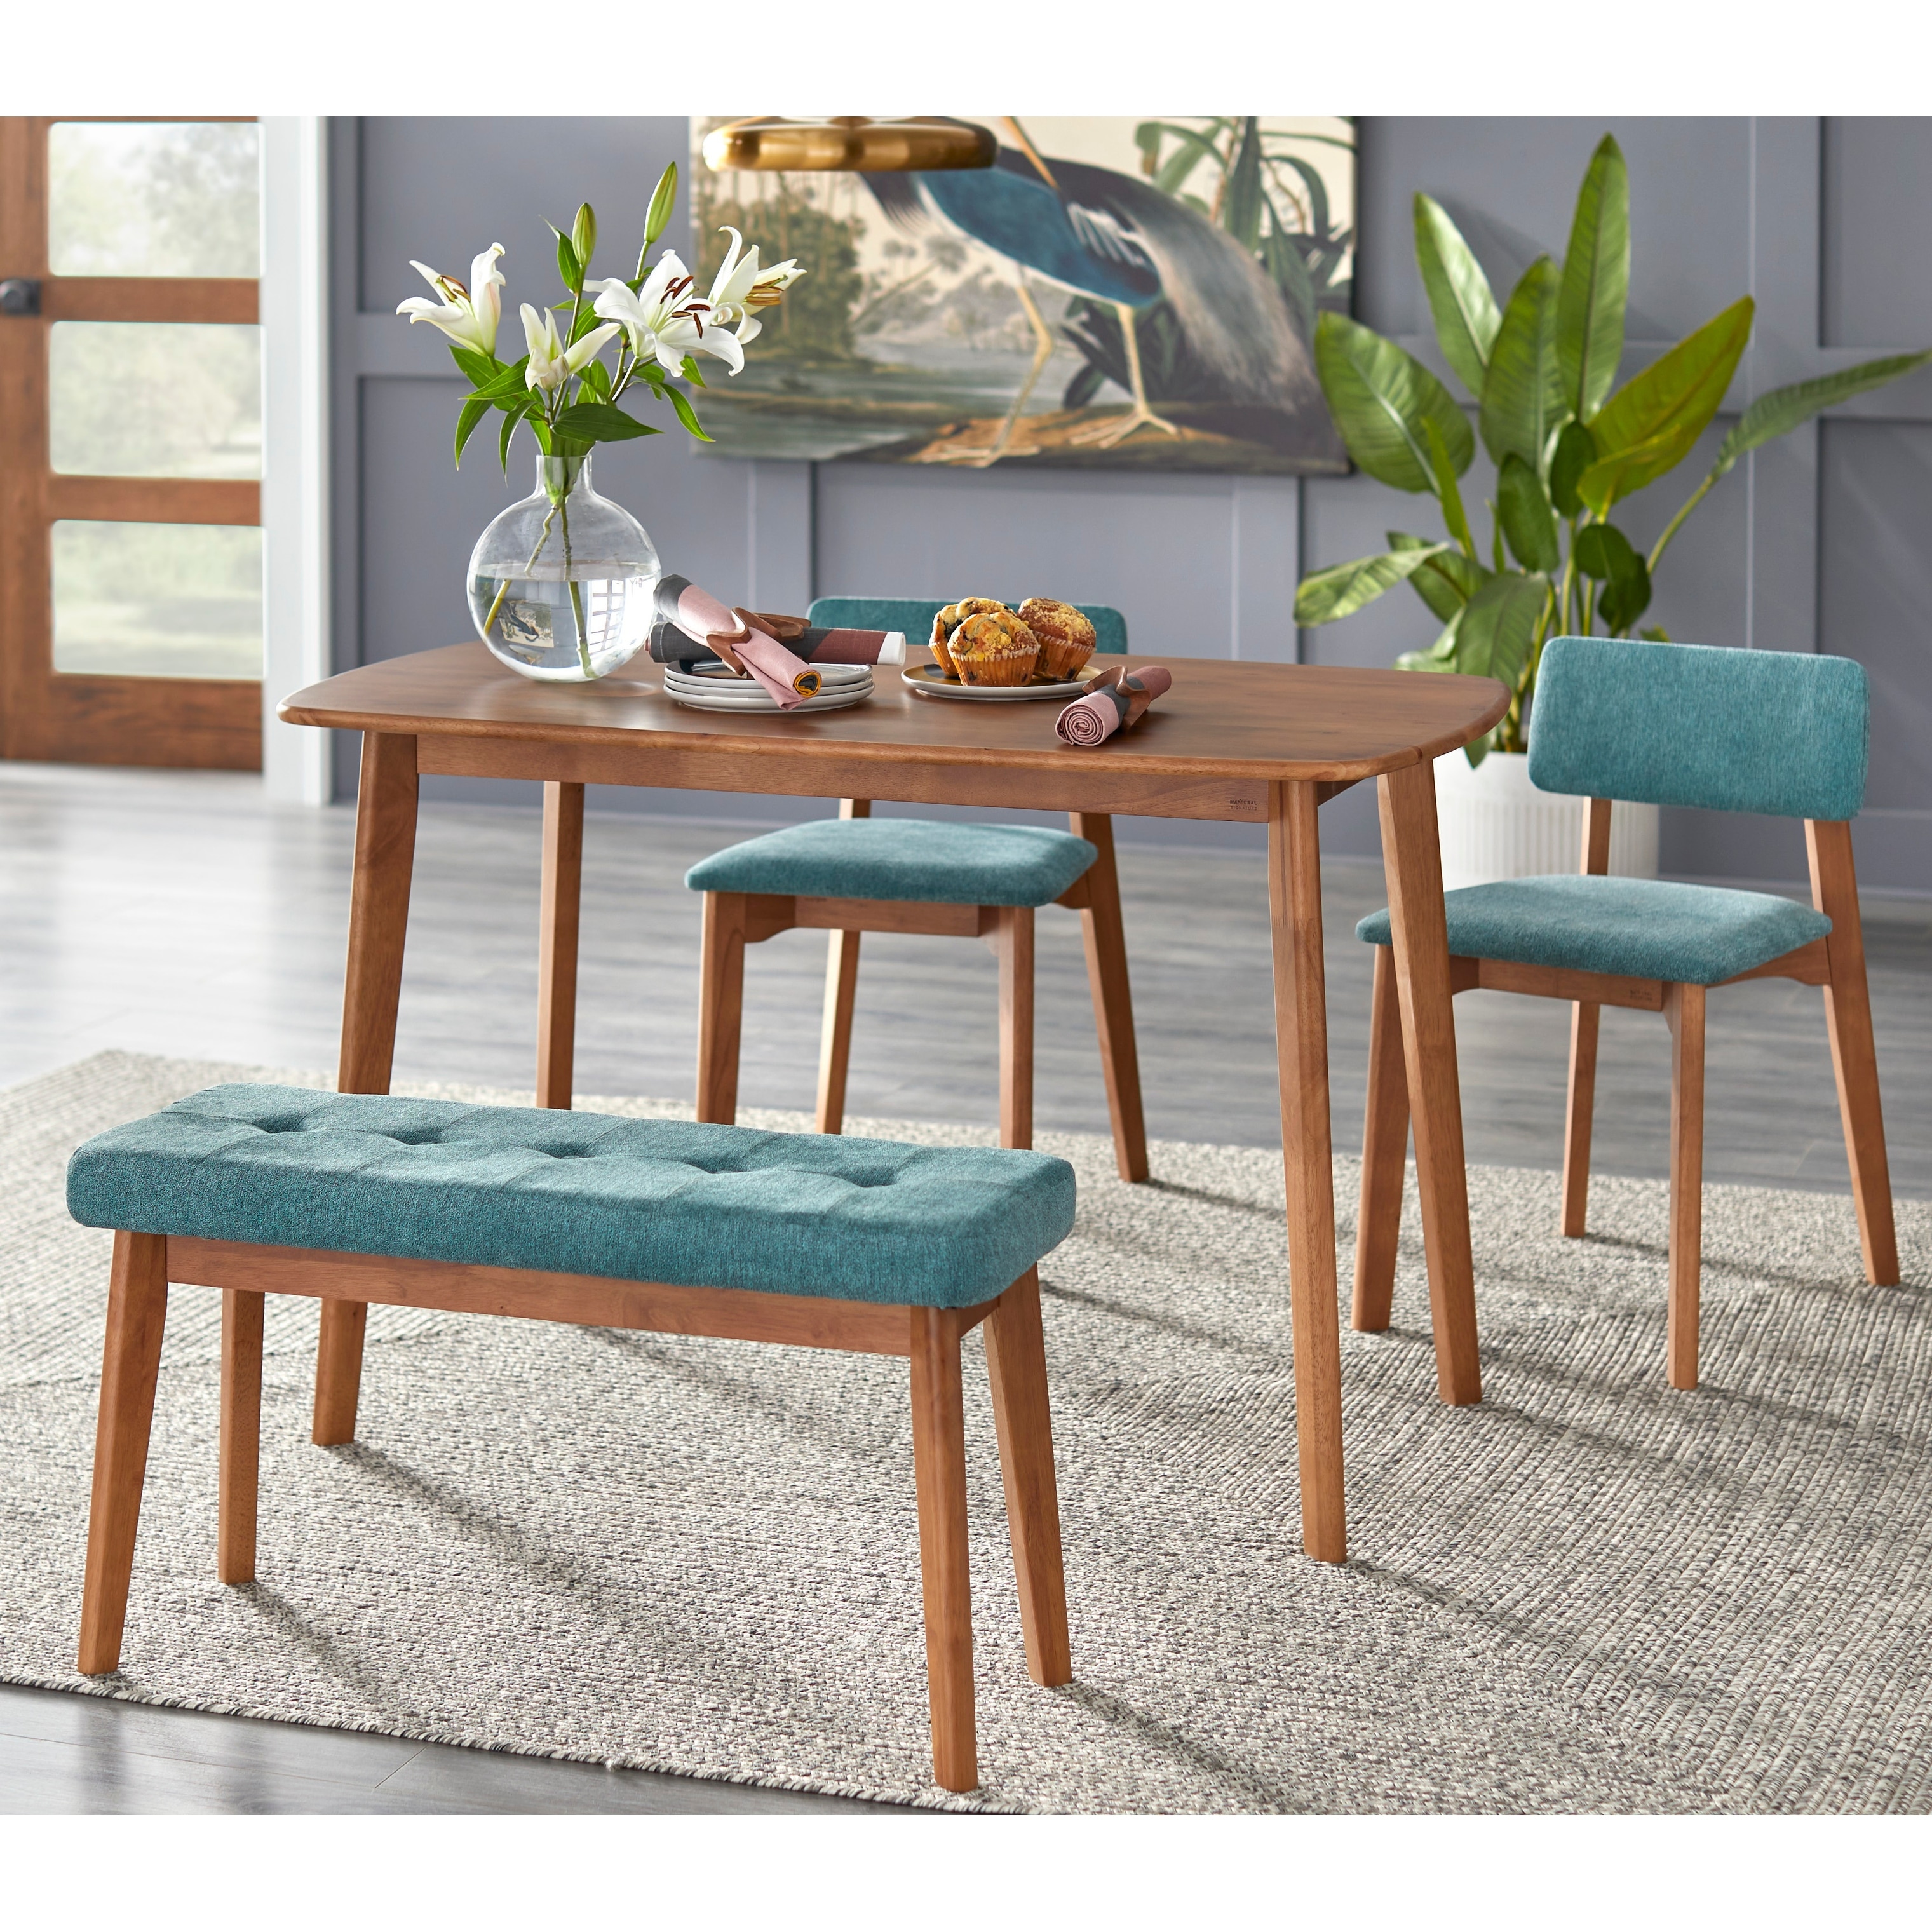 https://ak1.ostkcdn.com/images/products/is/images/direct/3c7ce266d4a149cc5ca008fd6e6eedc035351863/Simple-Living-4-Piece-Nettie-Solid-Wood-Dining-Set.jpg